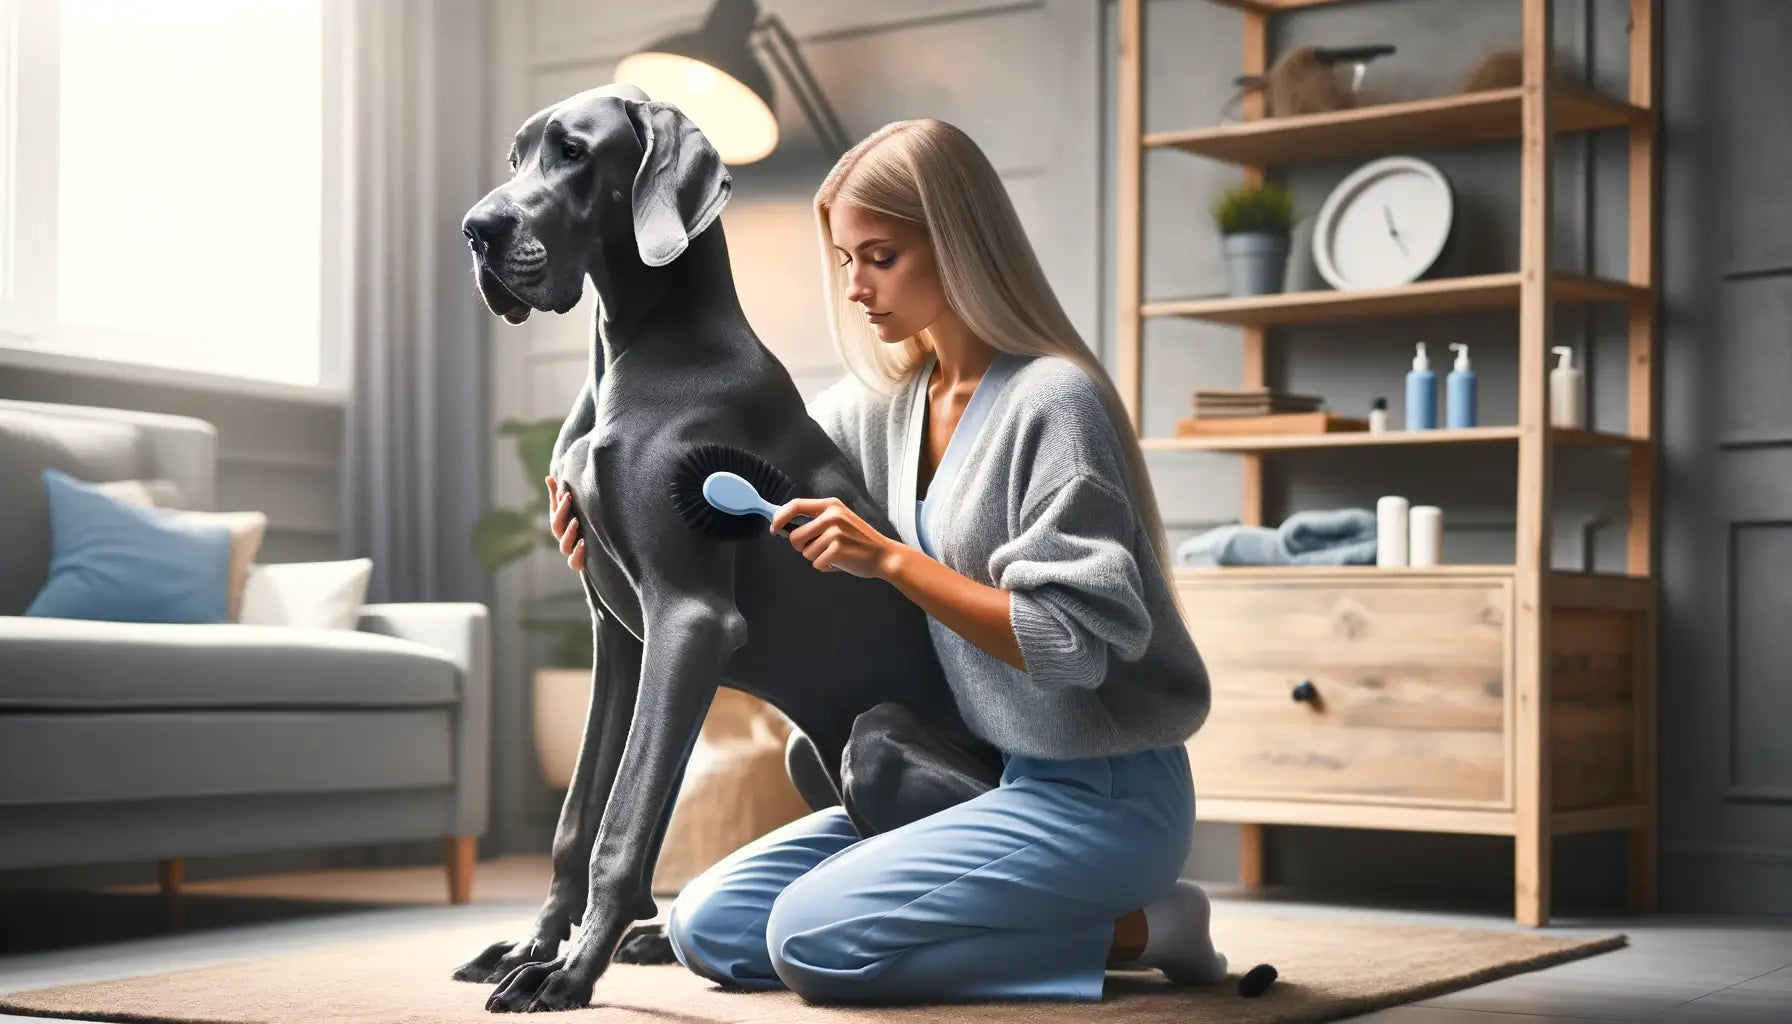 Blue Great Dane being groomed by its owner at home.